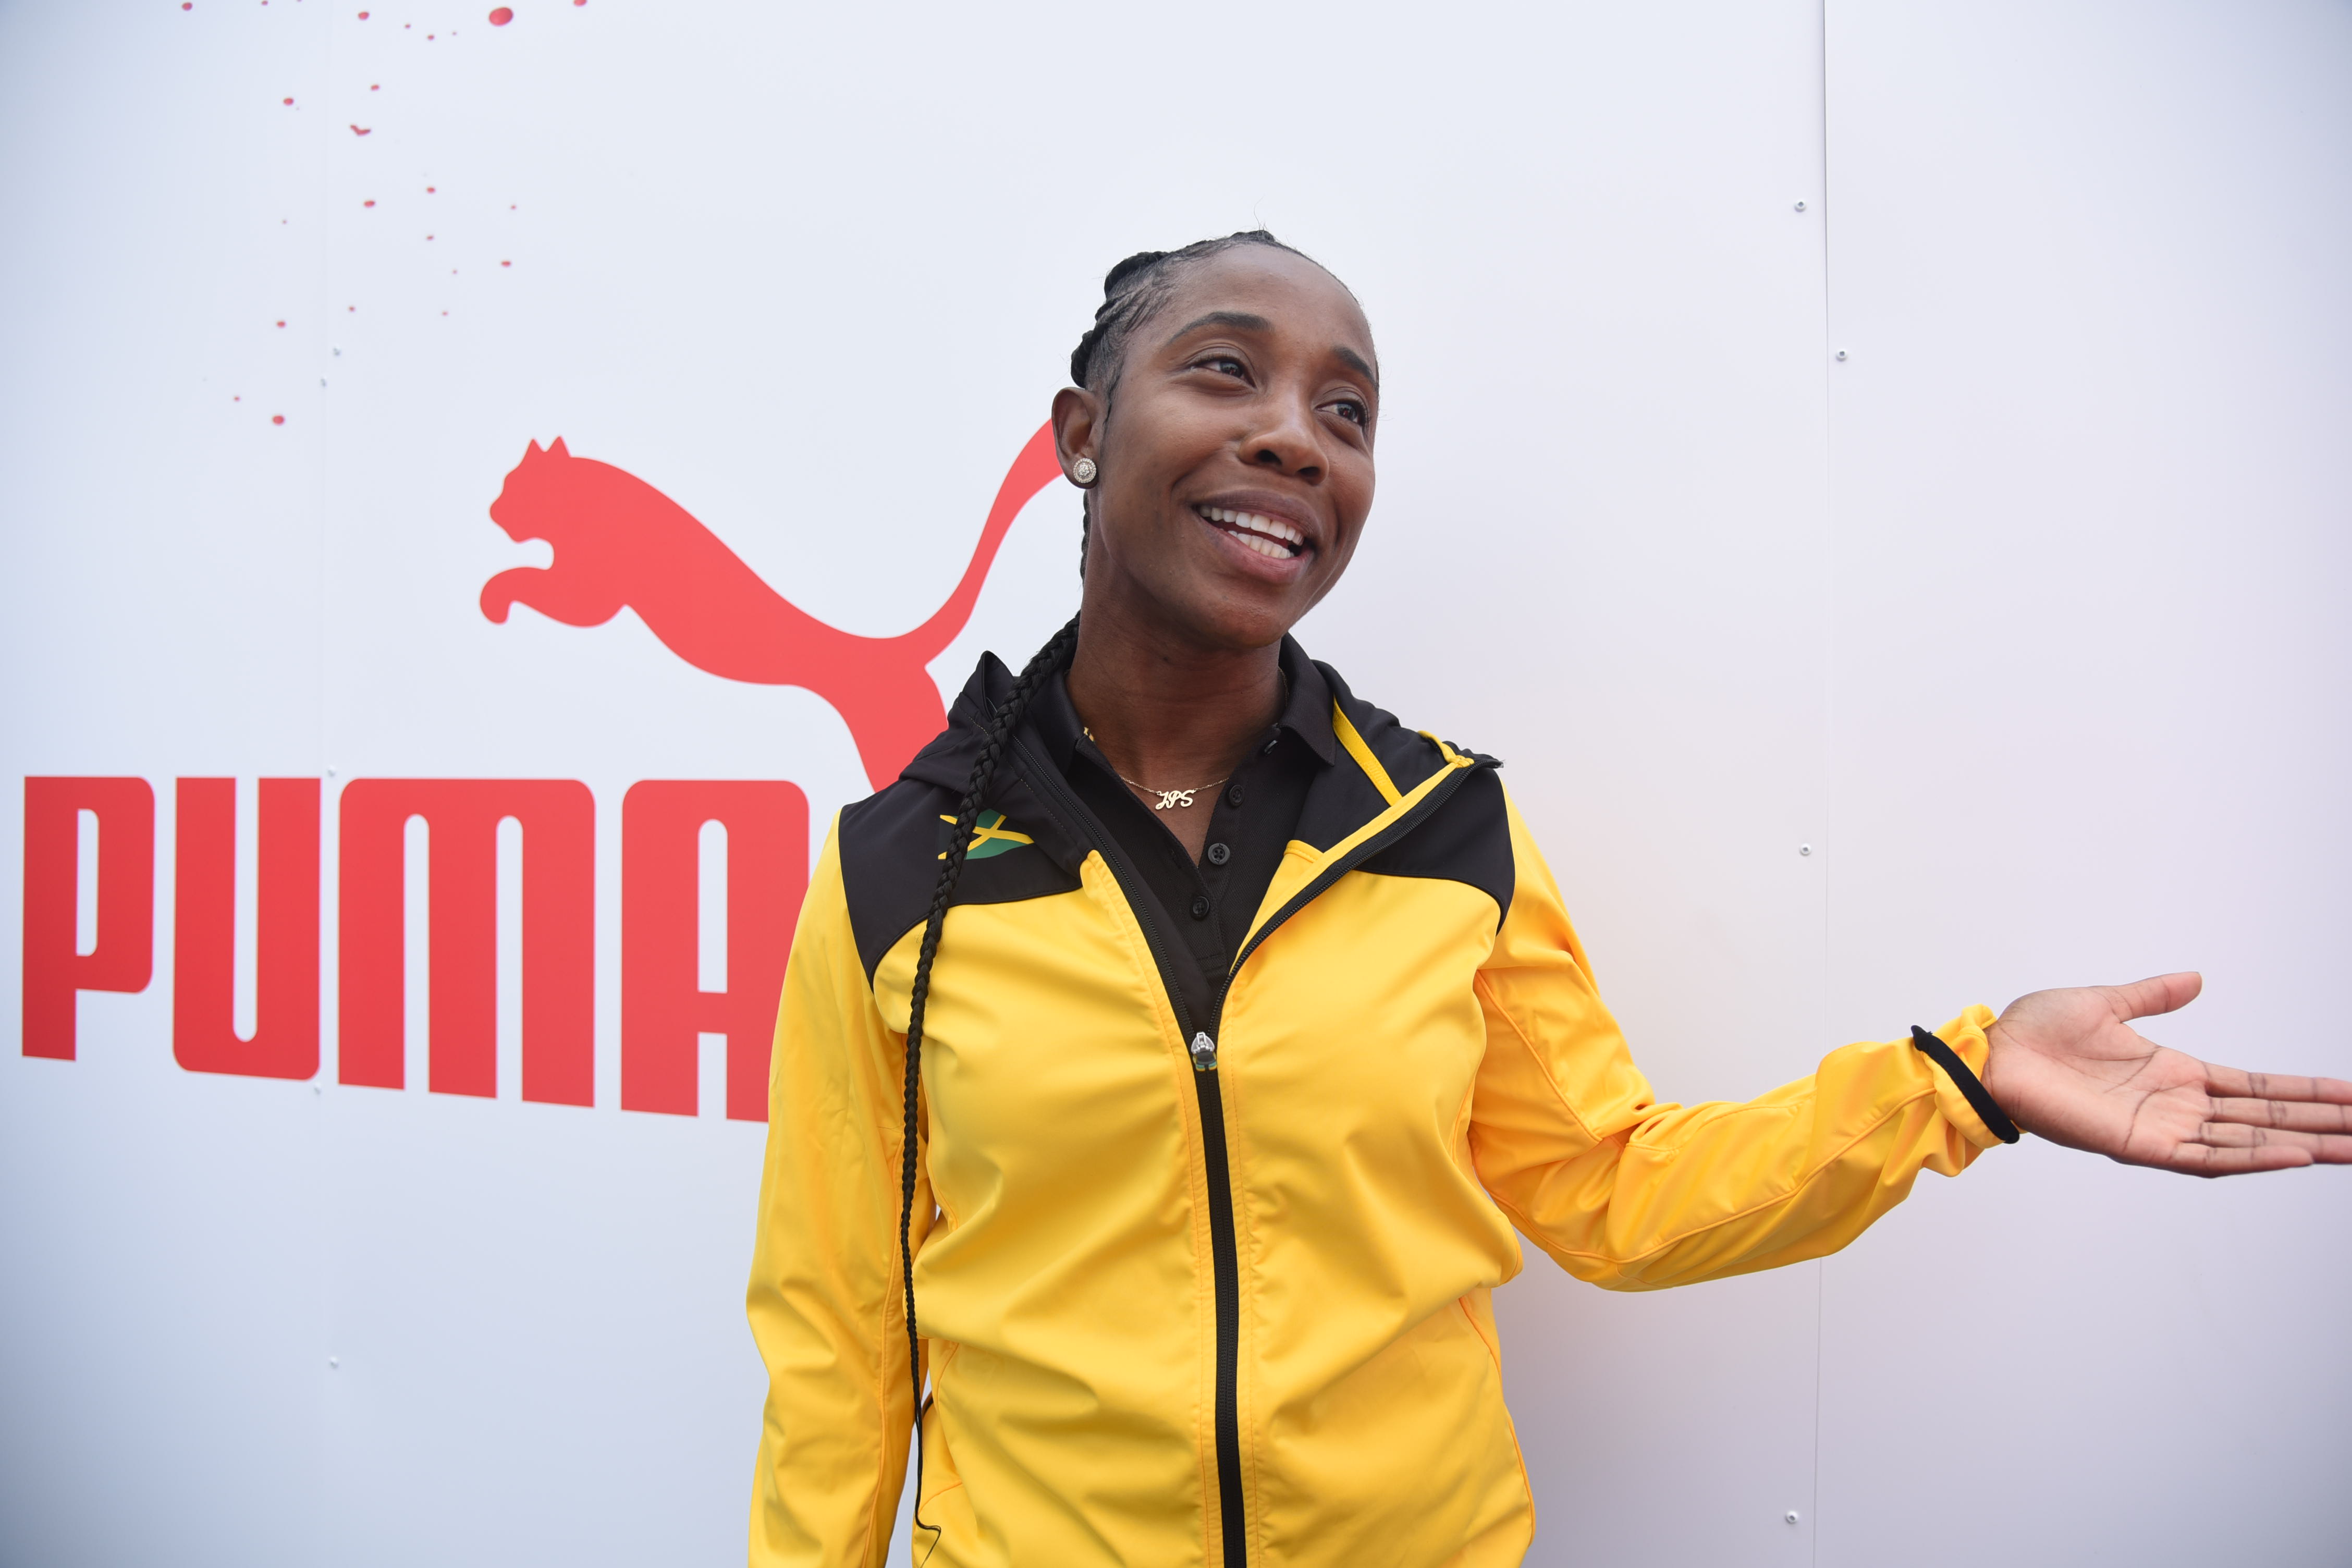 Fraser-Pryce looking for great returns at NACAC Championships